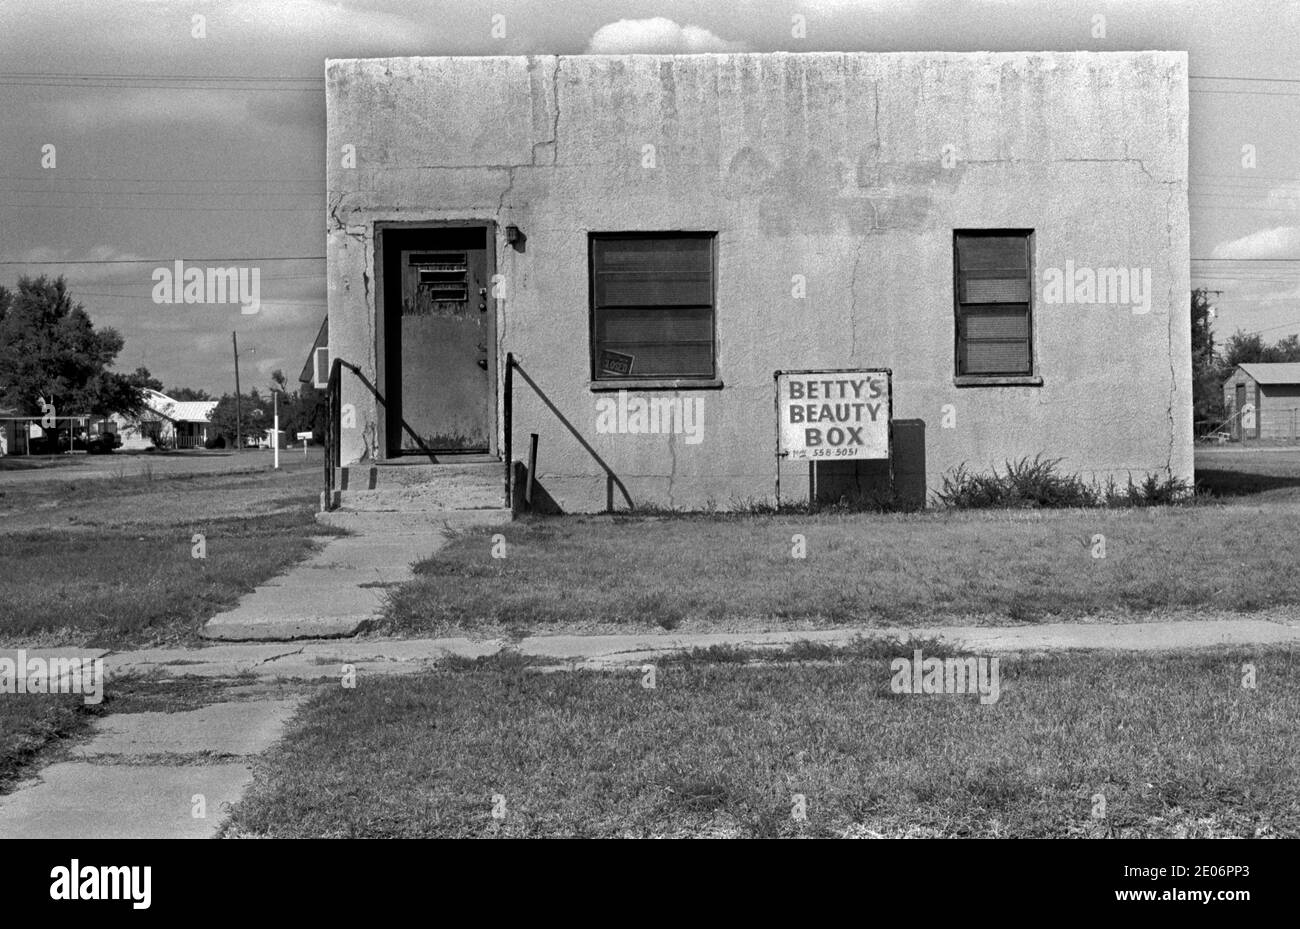 Beauty parlour building, called Bettys Beauty Box, small town America, called Happy, Texas 1990s 1999 USA HOMER SYKES Stock Photo